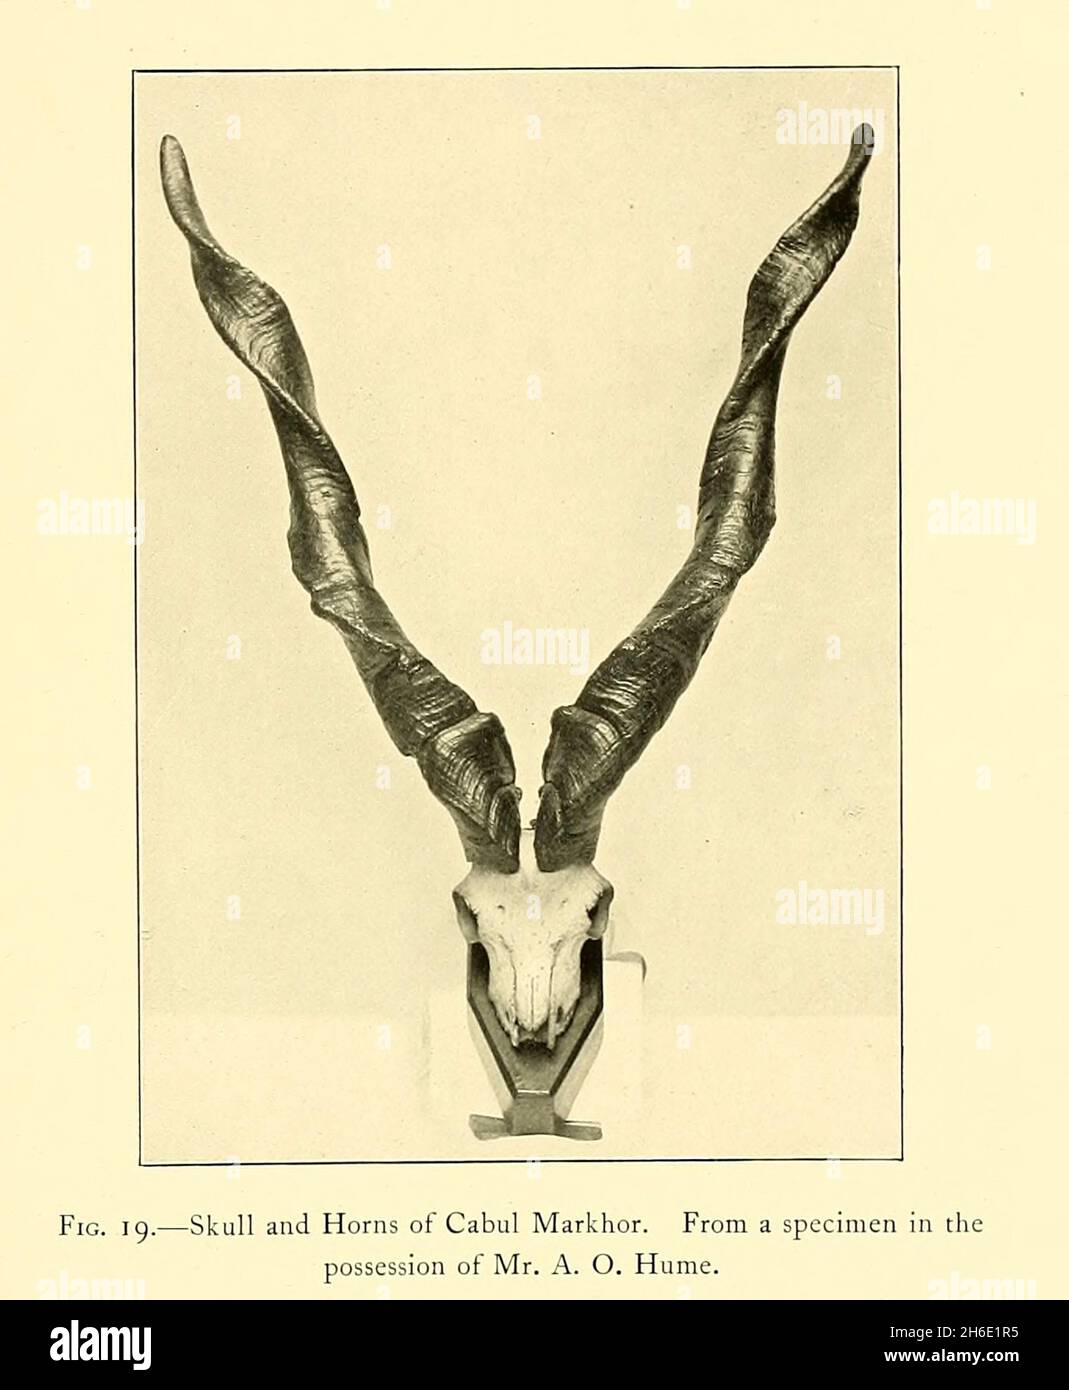 Skull and Horns of Cabul Markhor (Capra falconeri). From a specimen in the possession of Mr. A. O. Hume. from the book ' The great and small game of India, Burma, & Tibet ' by Richard Lydekker, Published in London by R. Ward in 1900 Stock Photo